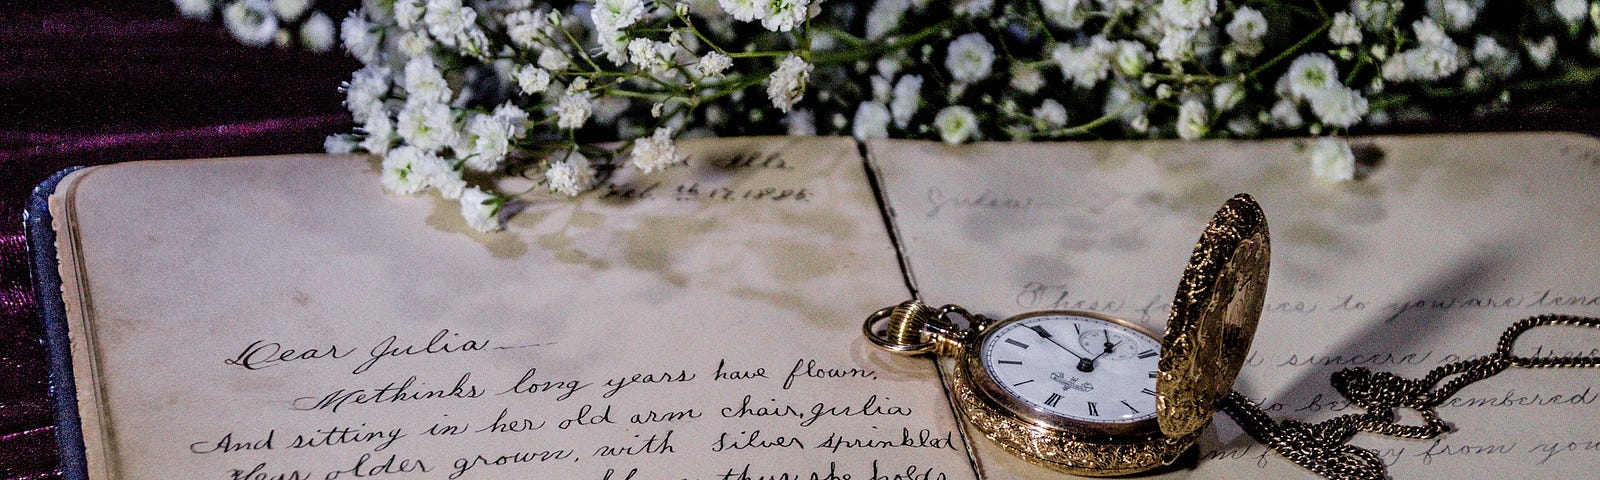 An old journal showing handwritten entry, a pocket watch and chain lies on the open pages, in the background are white flowers, baby’s breath, vintage, romantic, retro